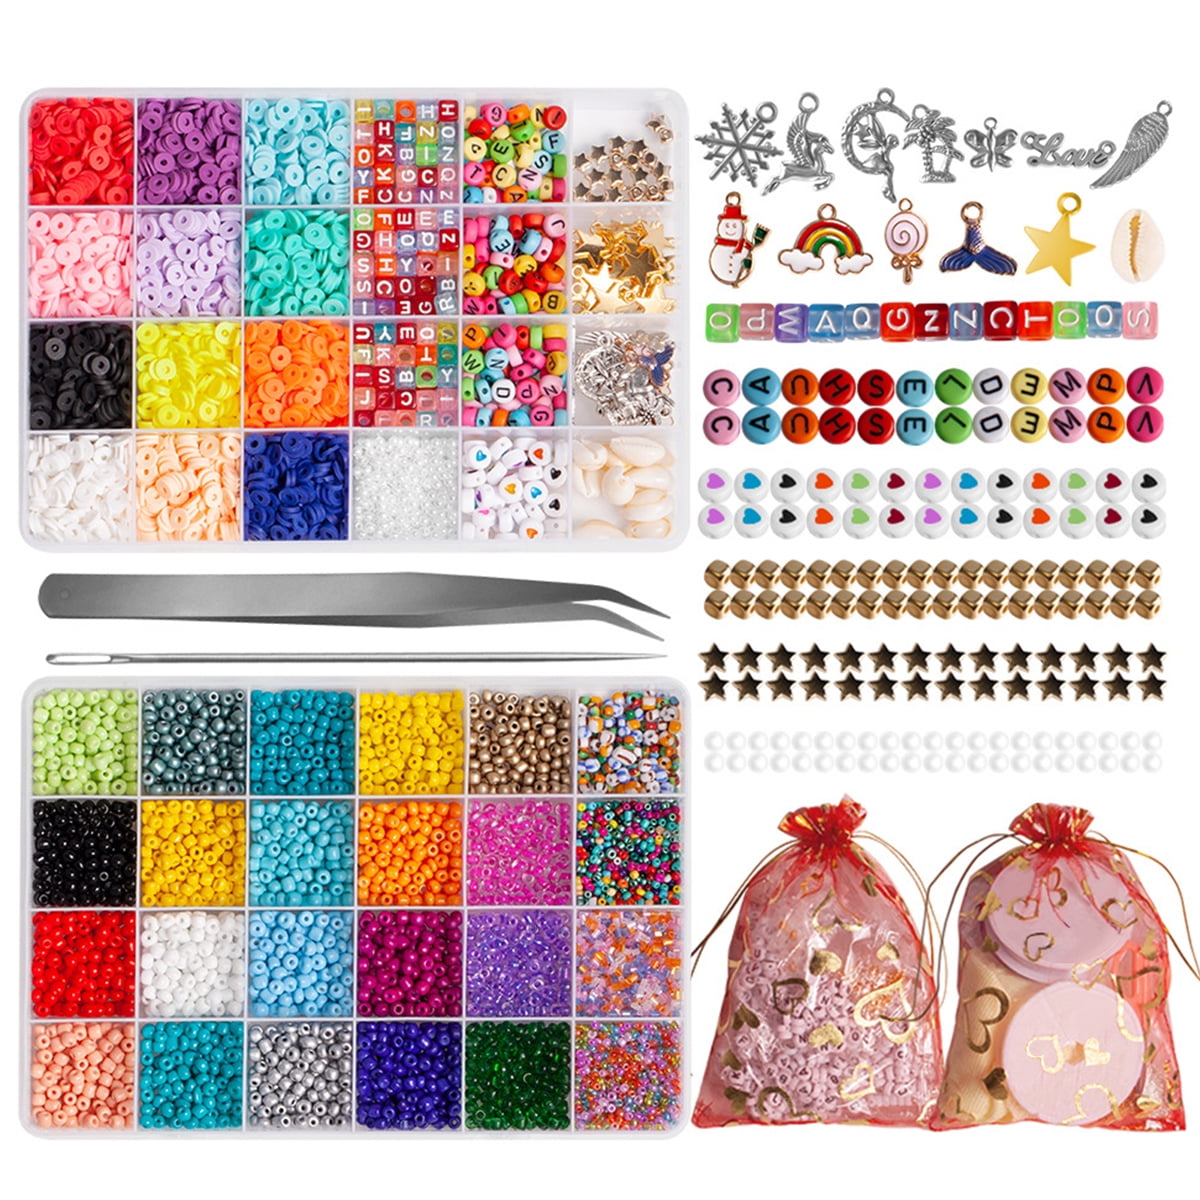  Acrylic Letter Beads Kit for Jewelry Making,Acrylic Round  Letter Beads for Bracelets and Jewelry Making in Multiple Color Available  (B) : Arts, Crafts & Sewing